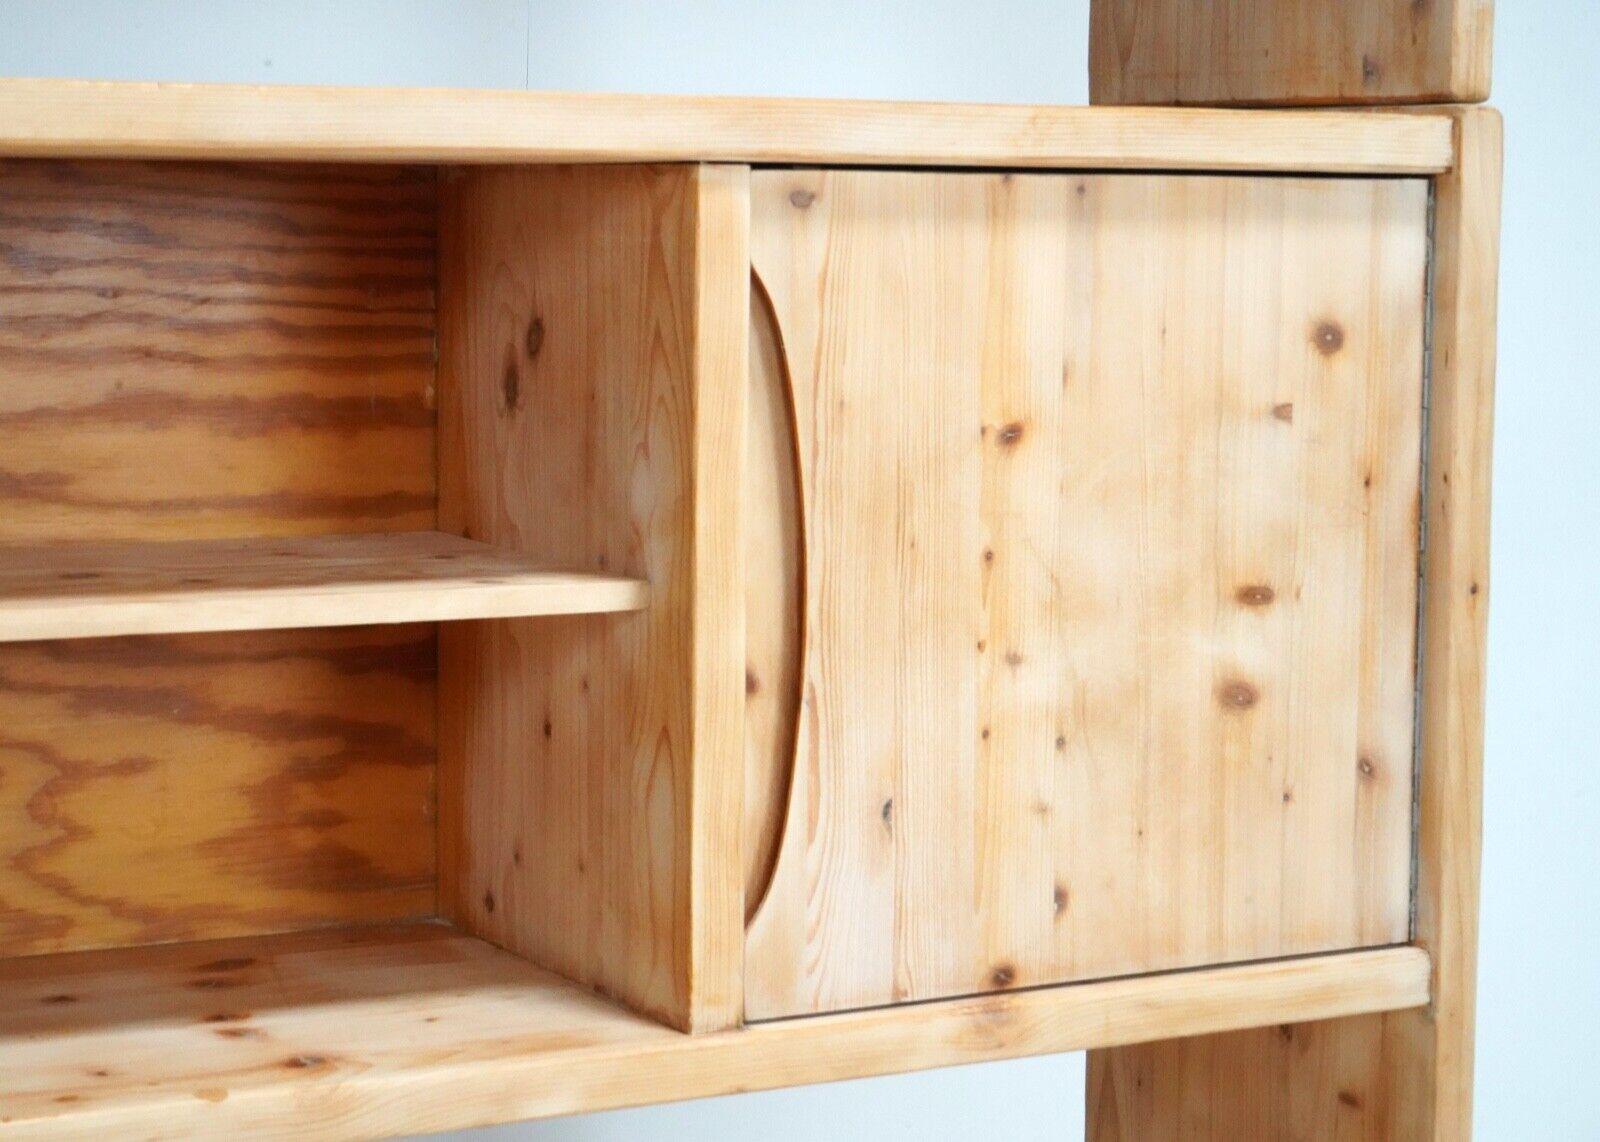 Rustic 1980s French Pine Modular Bookcase Highboard Shelving Unit